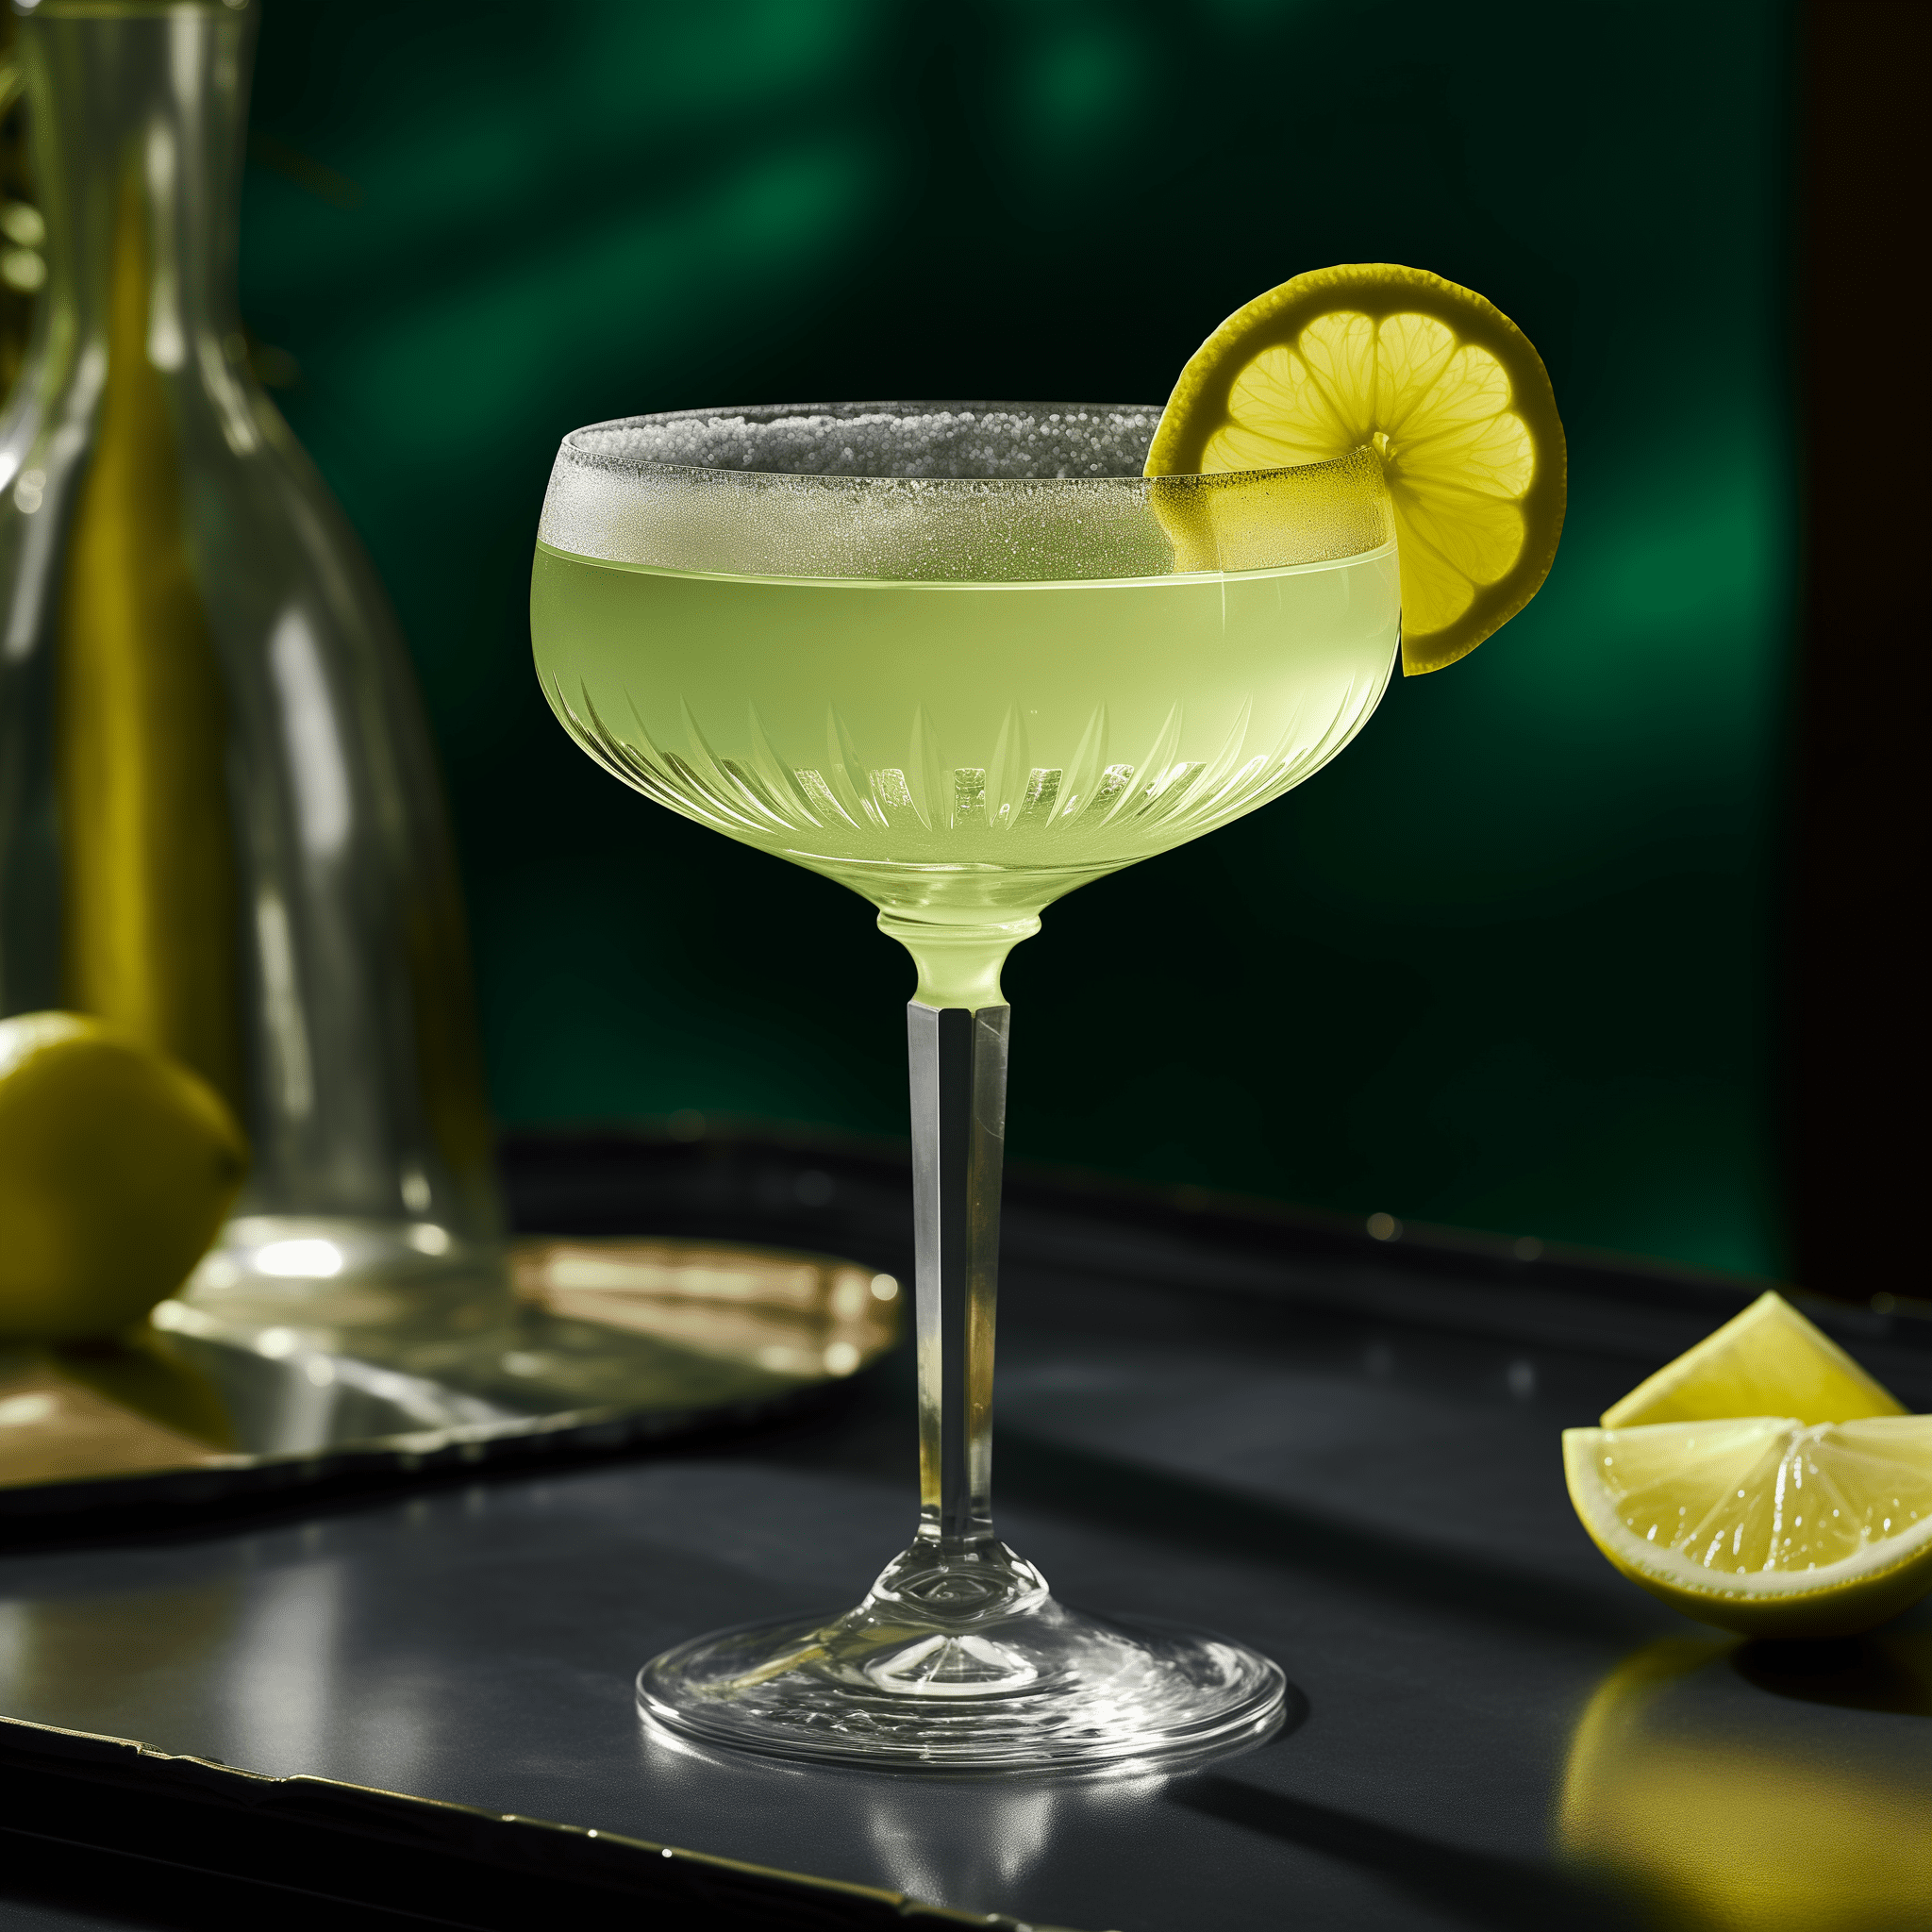 The Chartreuse Spritz offers a refreshing and effervescent experience with a unique herbal complexity. The taste profile includes:

- **Herbaceous**: The green Chartreuse provides a distinct blend of 130 herbs and plants.
- **Citrusy**: Fresh lemon juice adds a bright, tangy note.
- **Bubbly**: Prosecco brings a crisp effervescence that lightens the drink.
- **Bitter-Sweet**: The combination of the herbal liqueur and the prosecco creates a balanced bitter-sweet symphony.